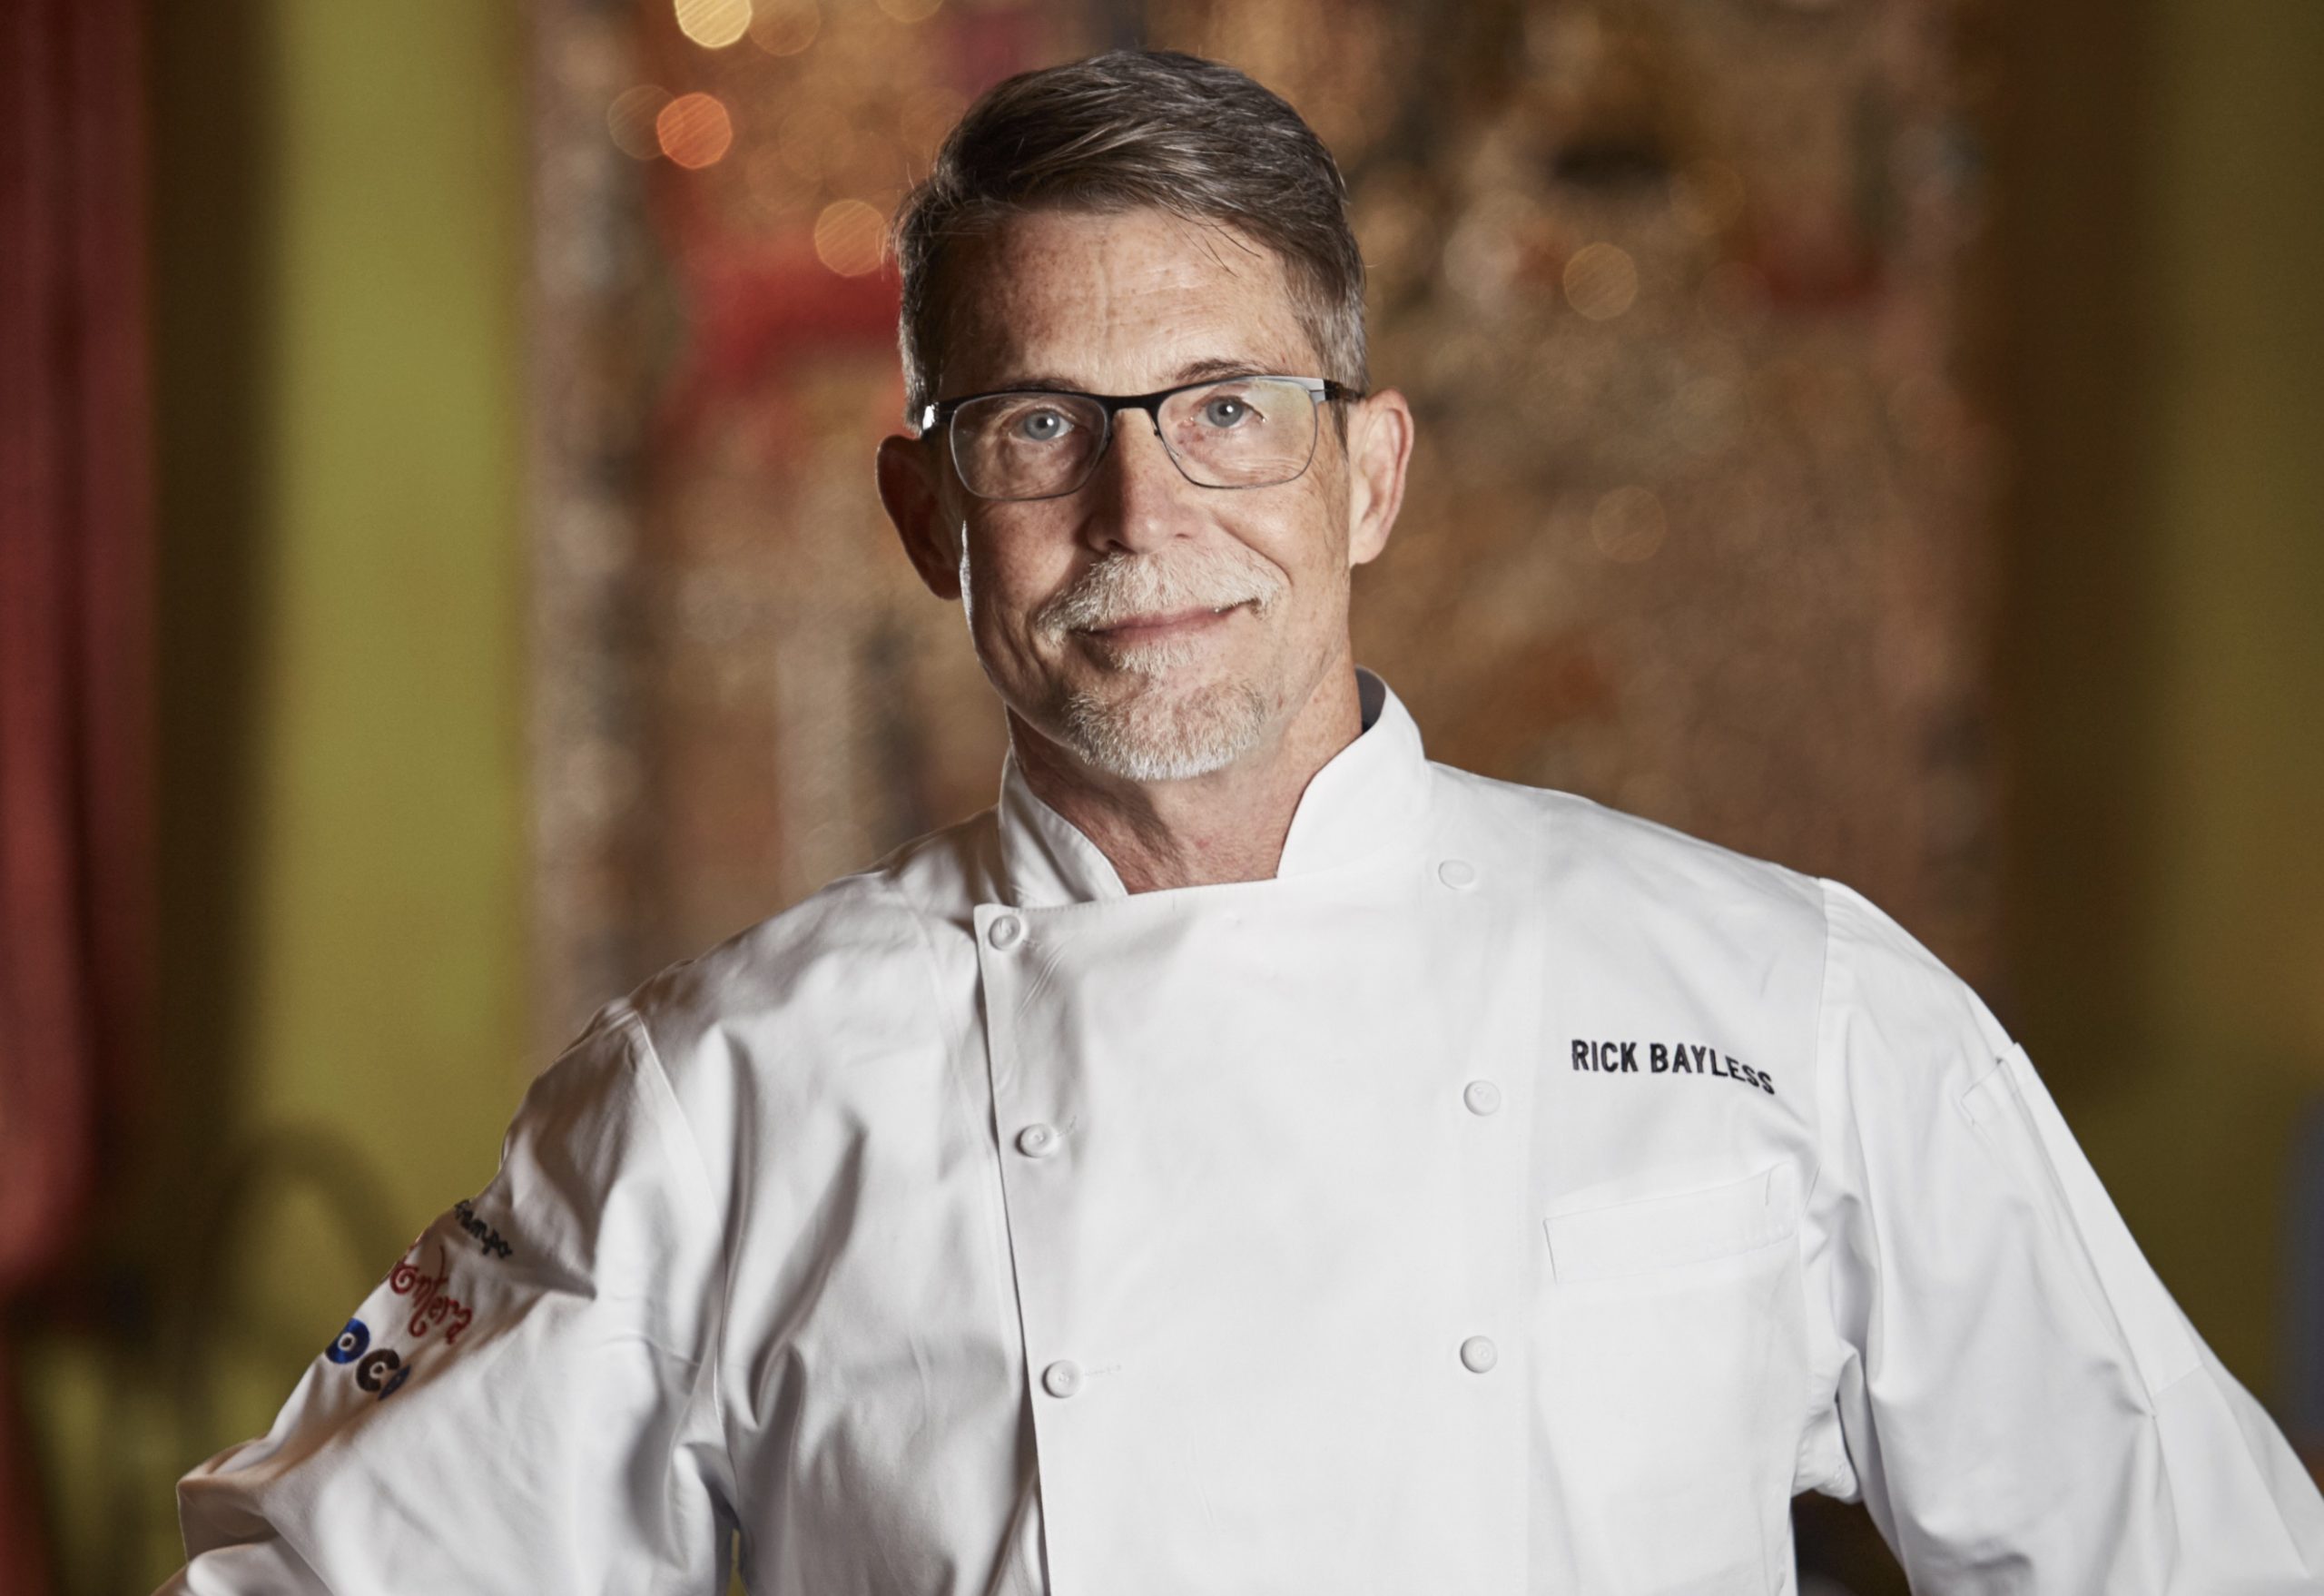 Rick Bayless Net Worth - A Look Into His Net Worth And Culinary Empire